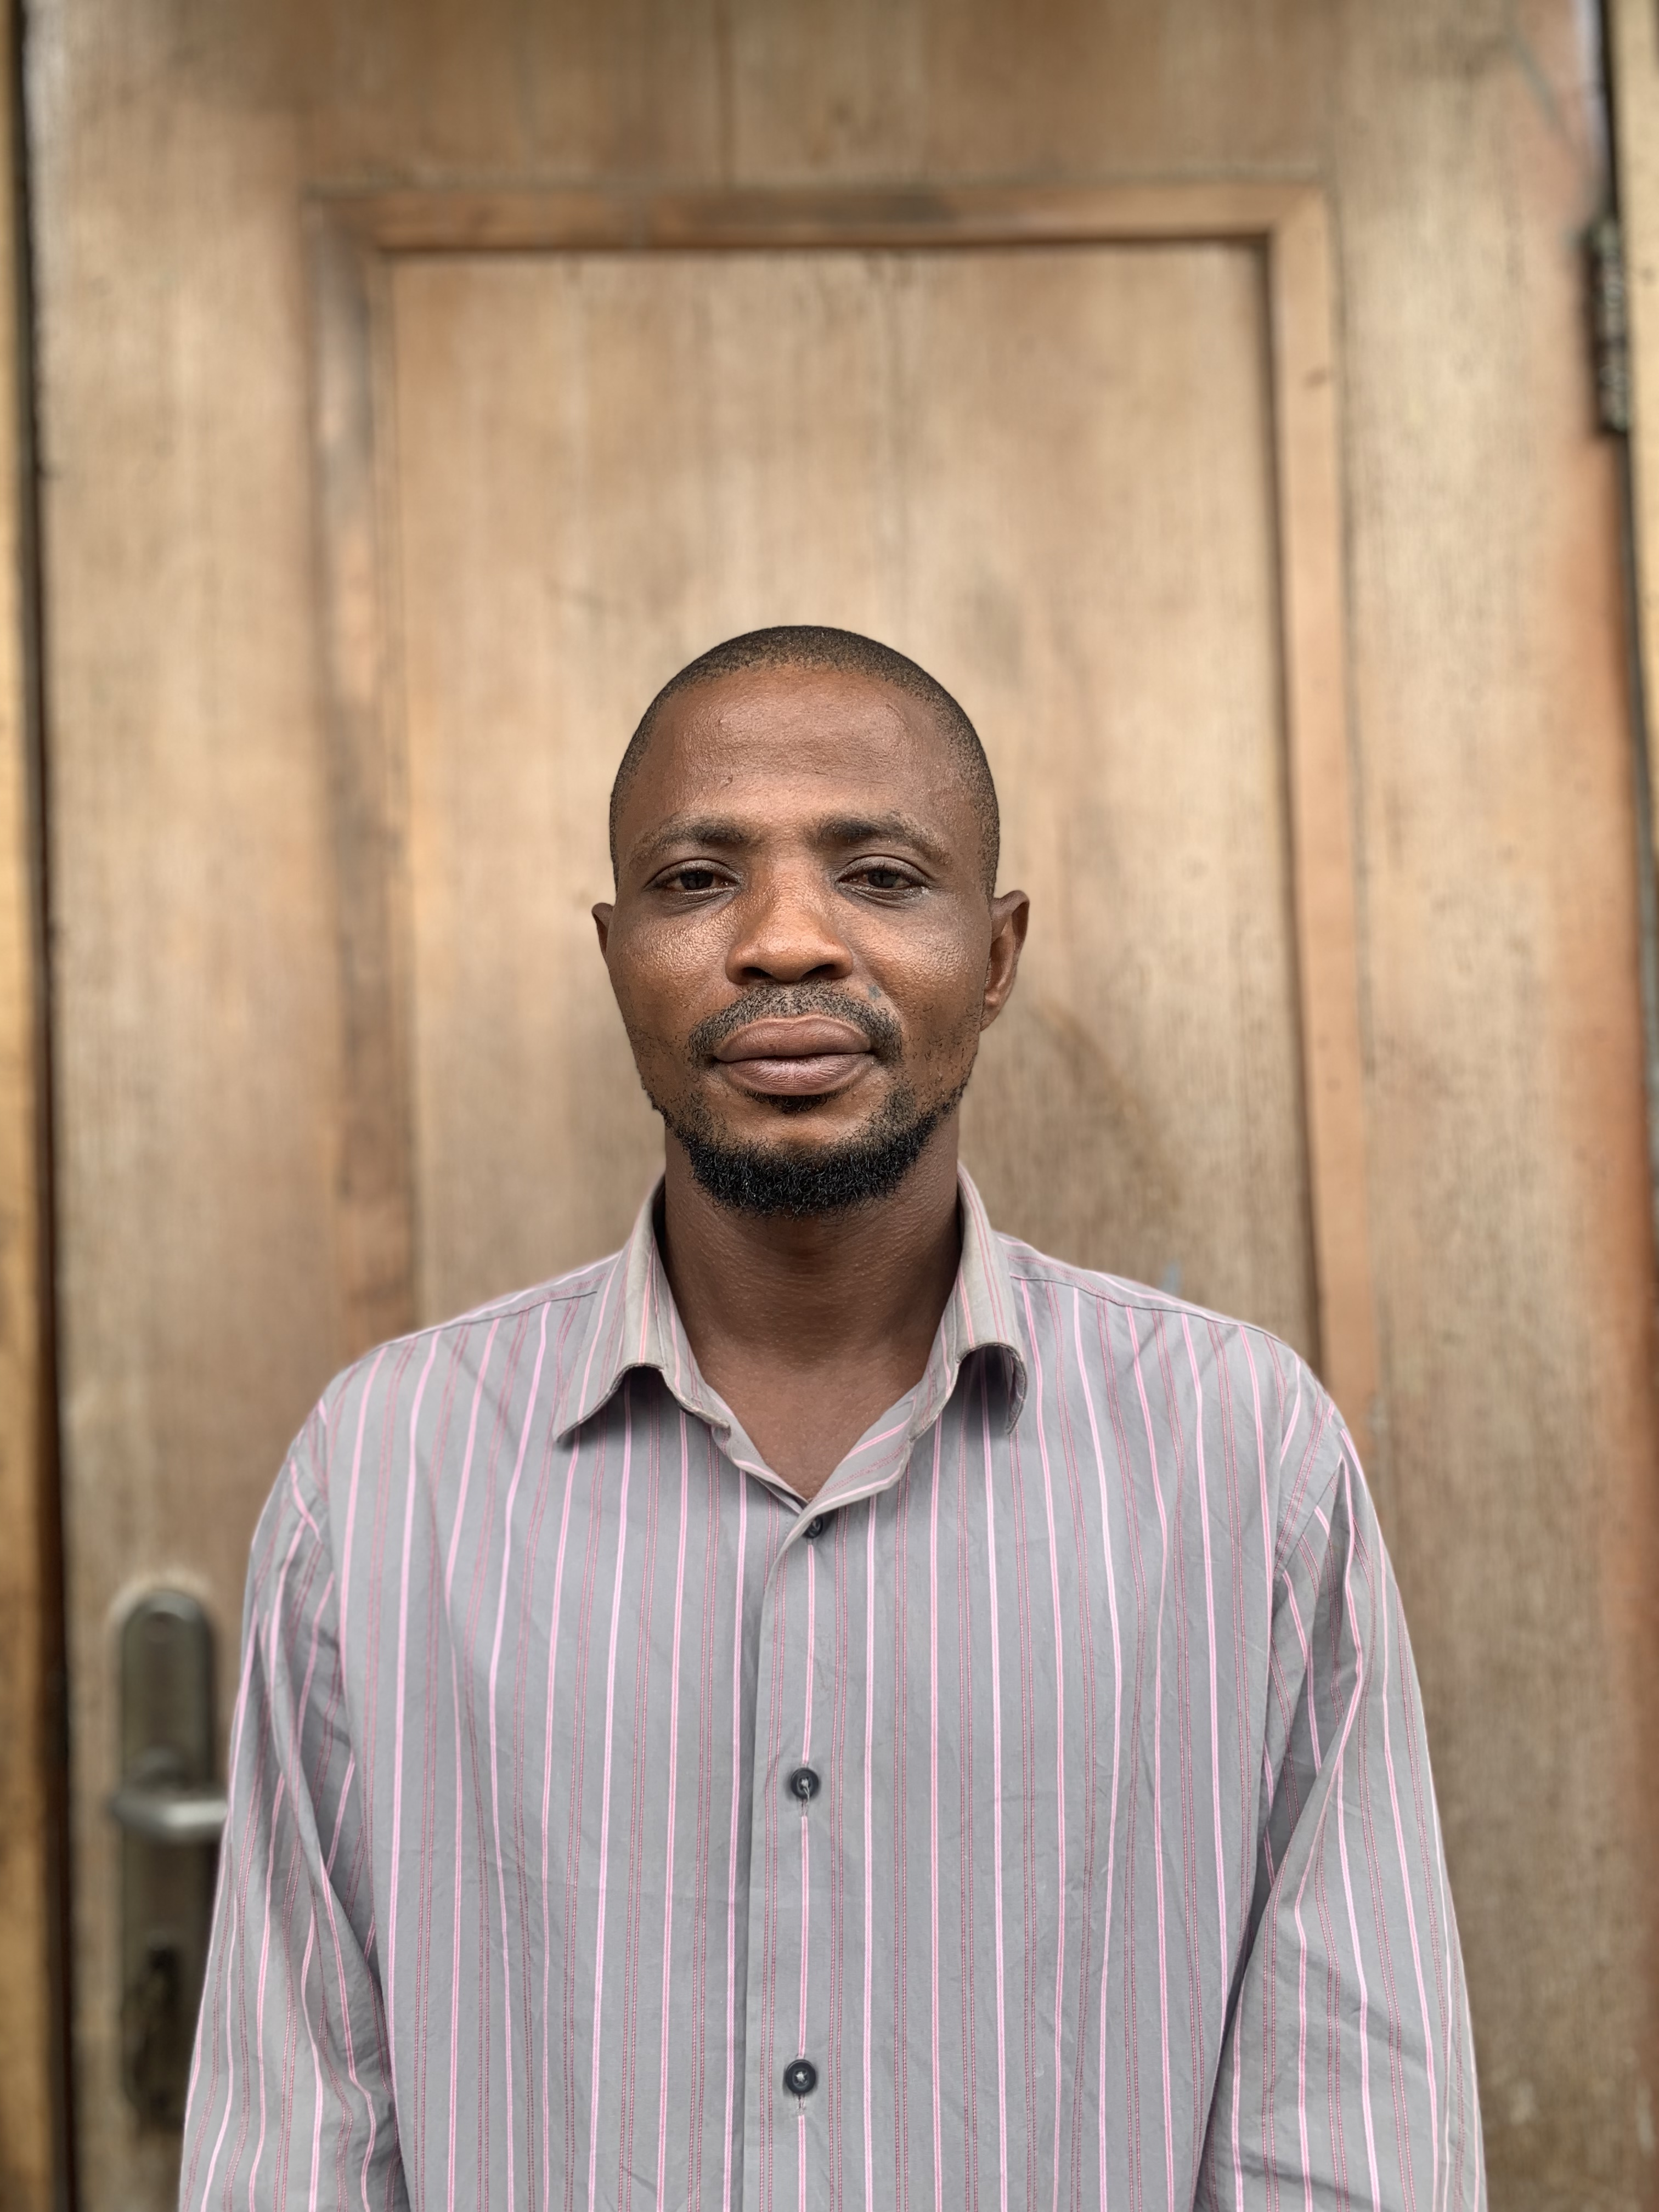 Segun is still trying to piece his life back together since he regained his freedom [Ejiro Eyanohonre]